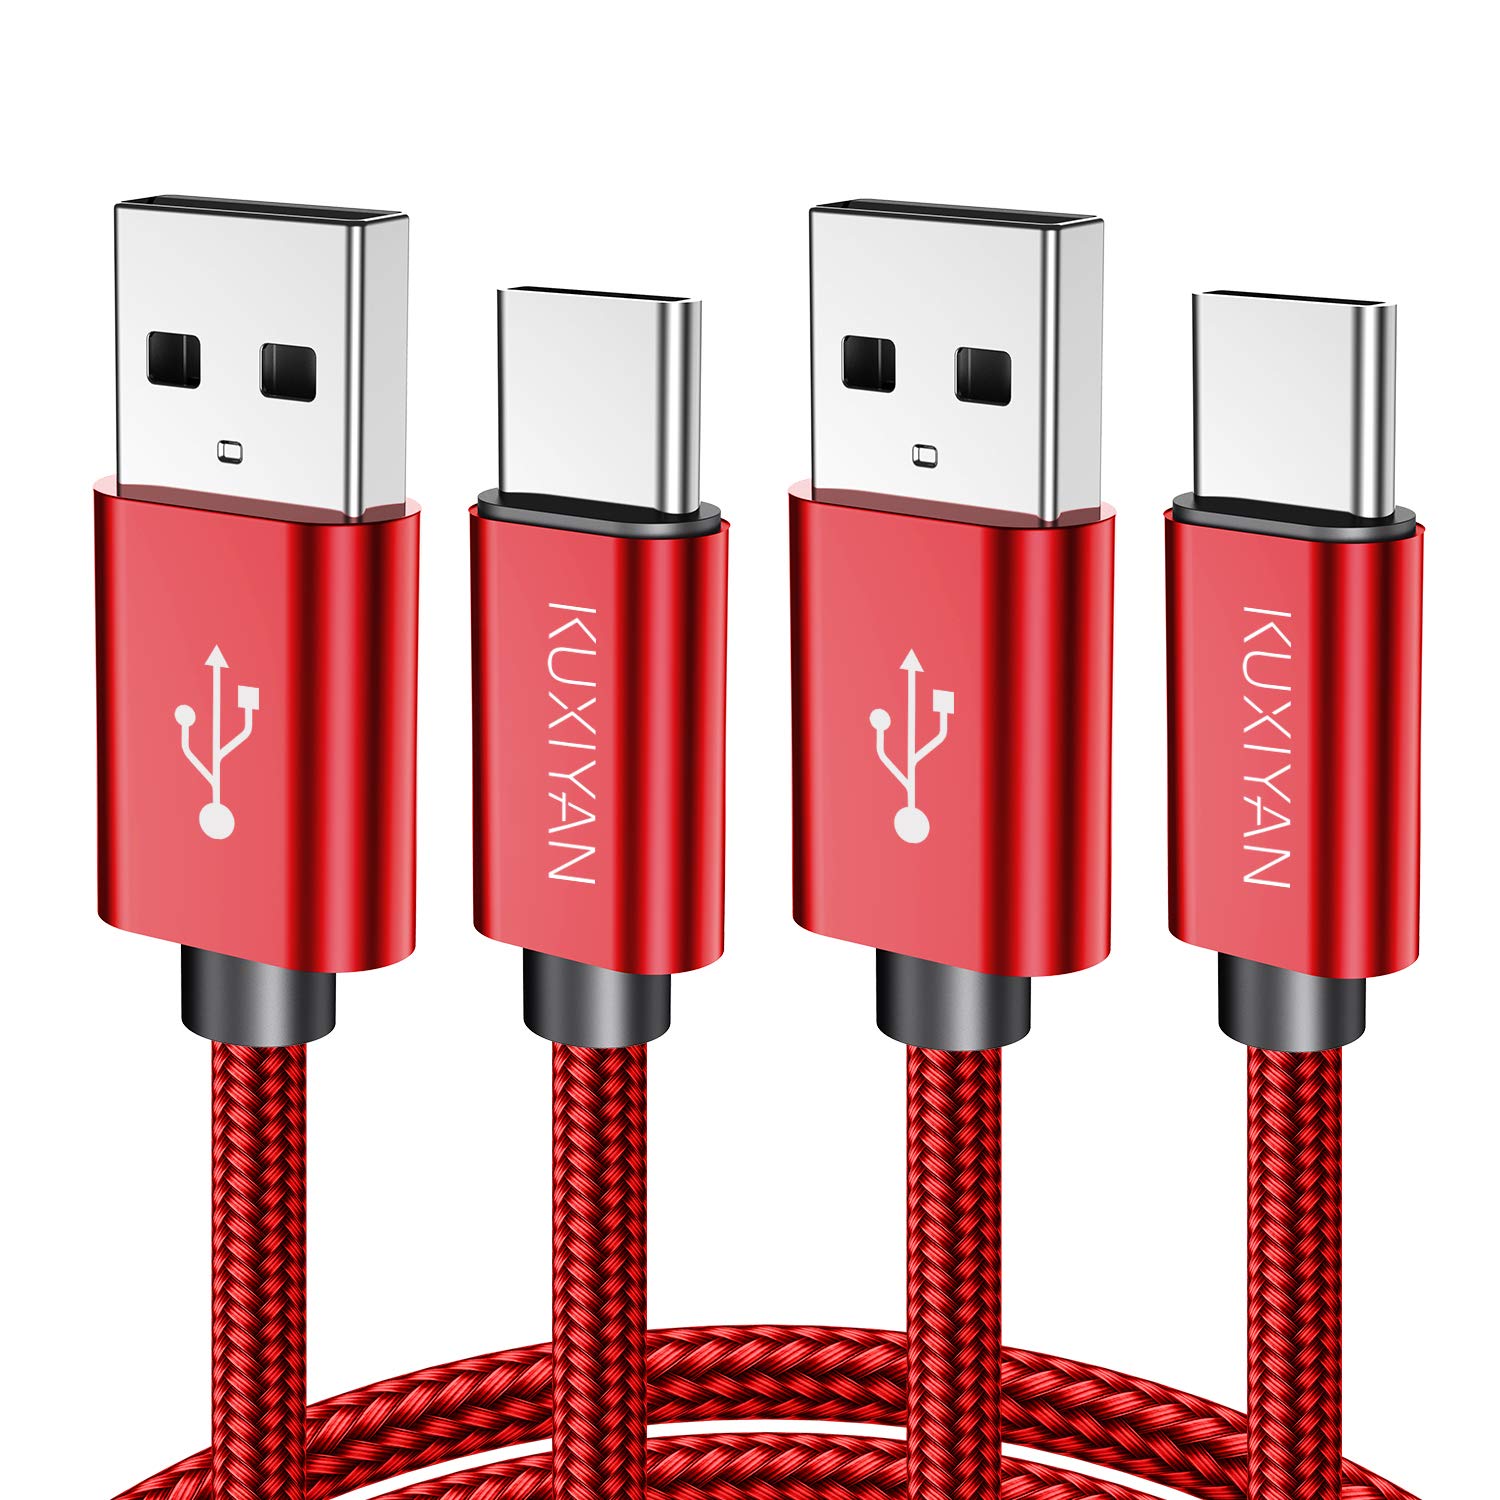 Book Cover USB Type C Cable, (2-PACK 3FT) USB C Charger Cable Nylon Braided Fast Charging Sync Cord Compatible Samsung Galaxy S10e S9 S8 Plus,Note 9 8, LG G7 V30S V35 THINQ V30 G6,Google Pixel 2 xl,HTC U12+(Red)